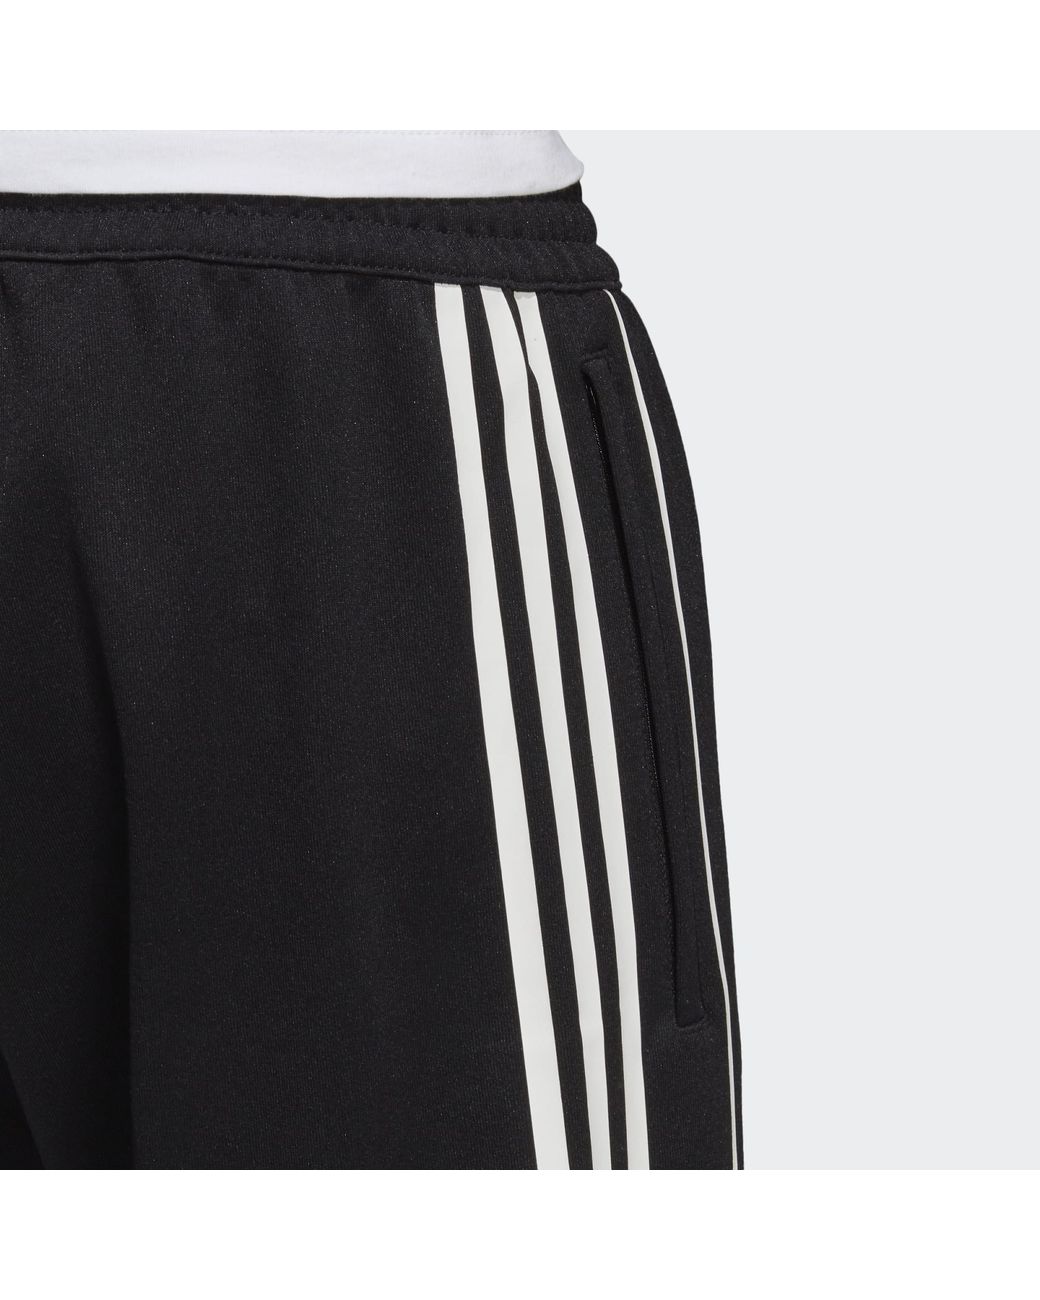 adidas Flamestrike Green Woven Track Pants  green XL at Urban Outfitters   Compare  Trinity Leeds